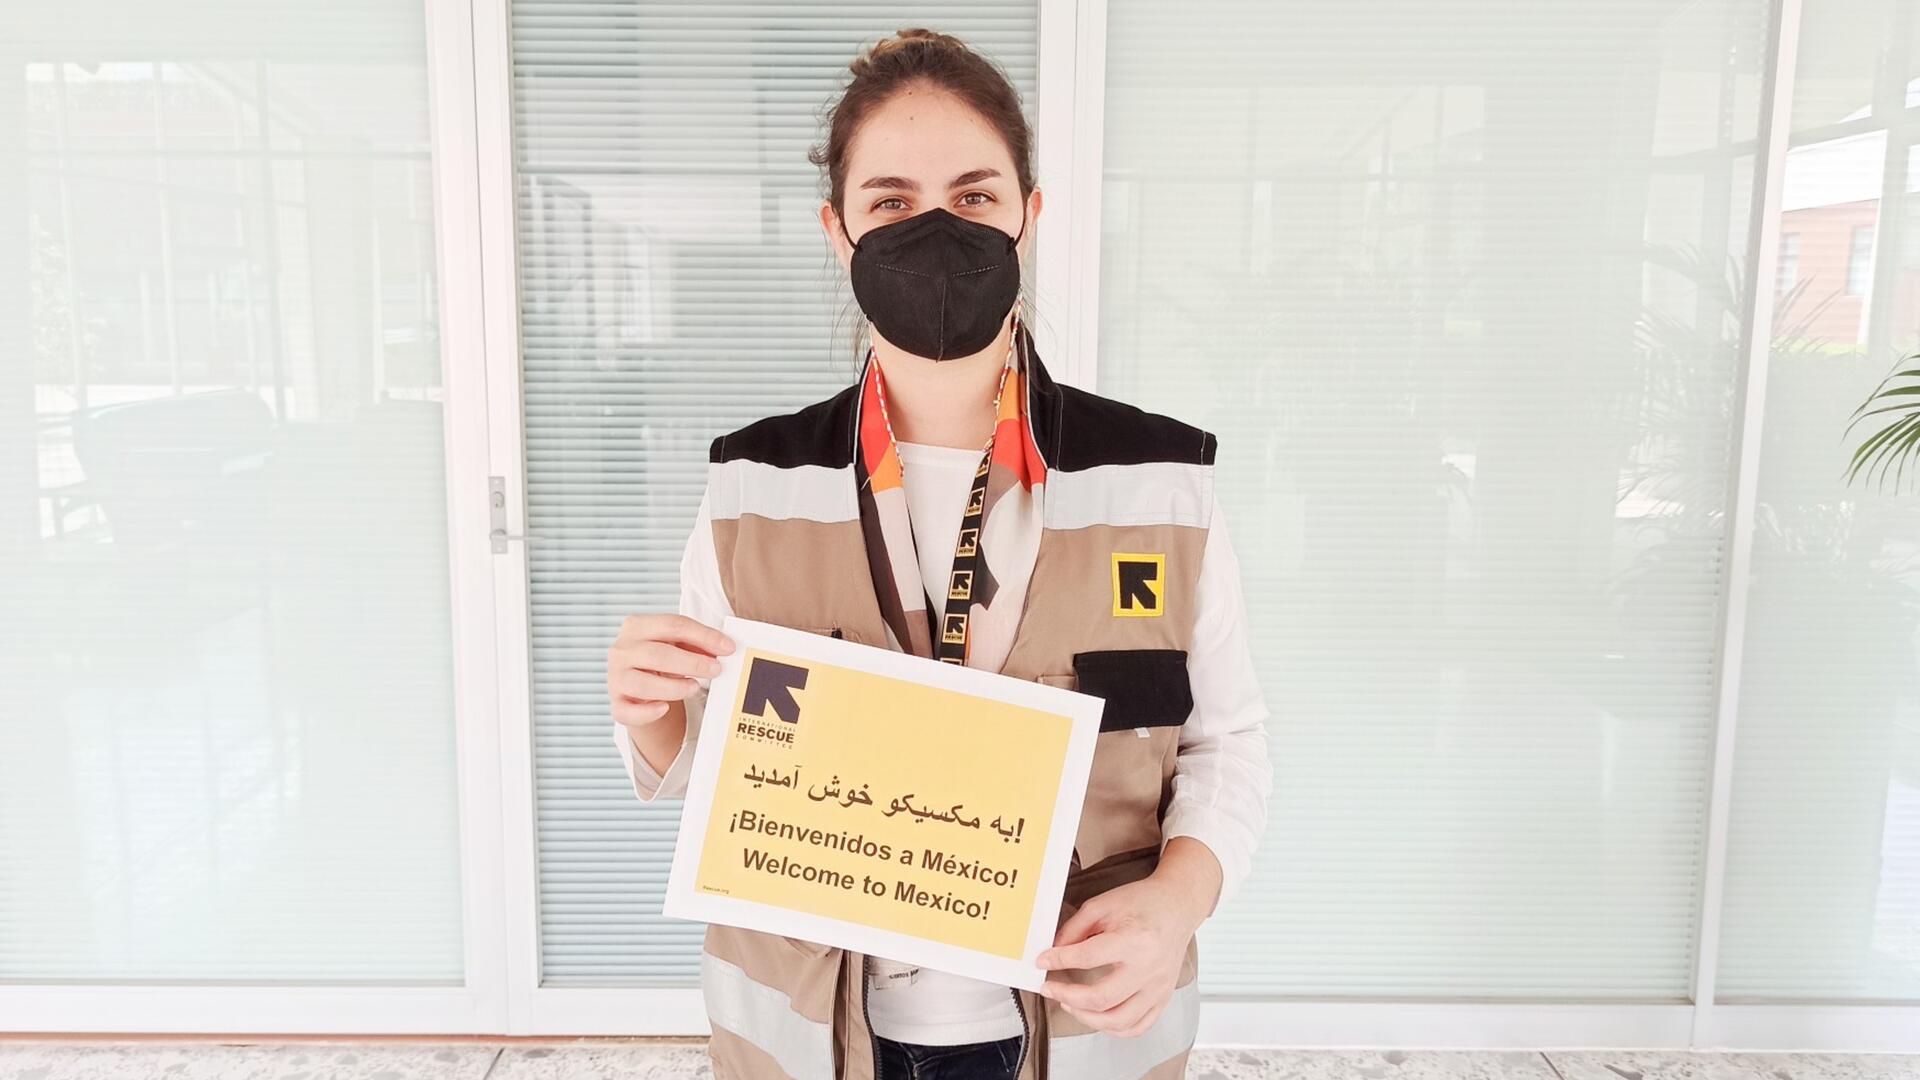 Fatima, a home visiting officer for the IRC in Mexico, holds a sign that says "welcome to Mexico" in English, Spanish and Dari. She is wearing a mask and an IRC vest. 